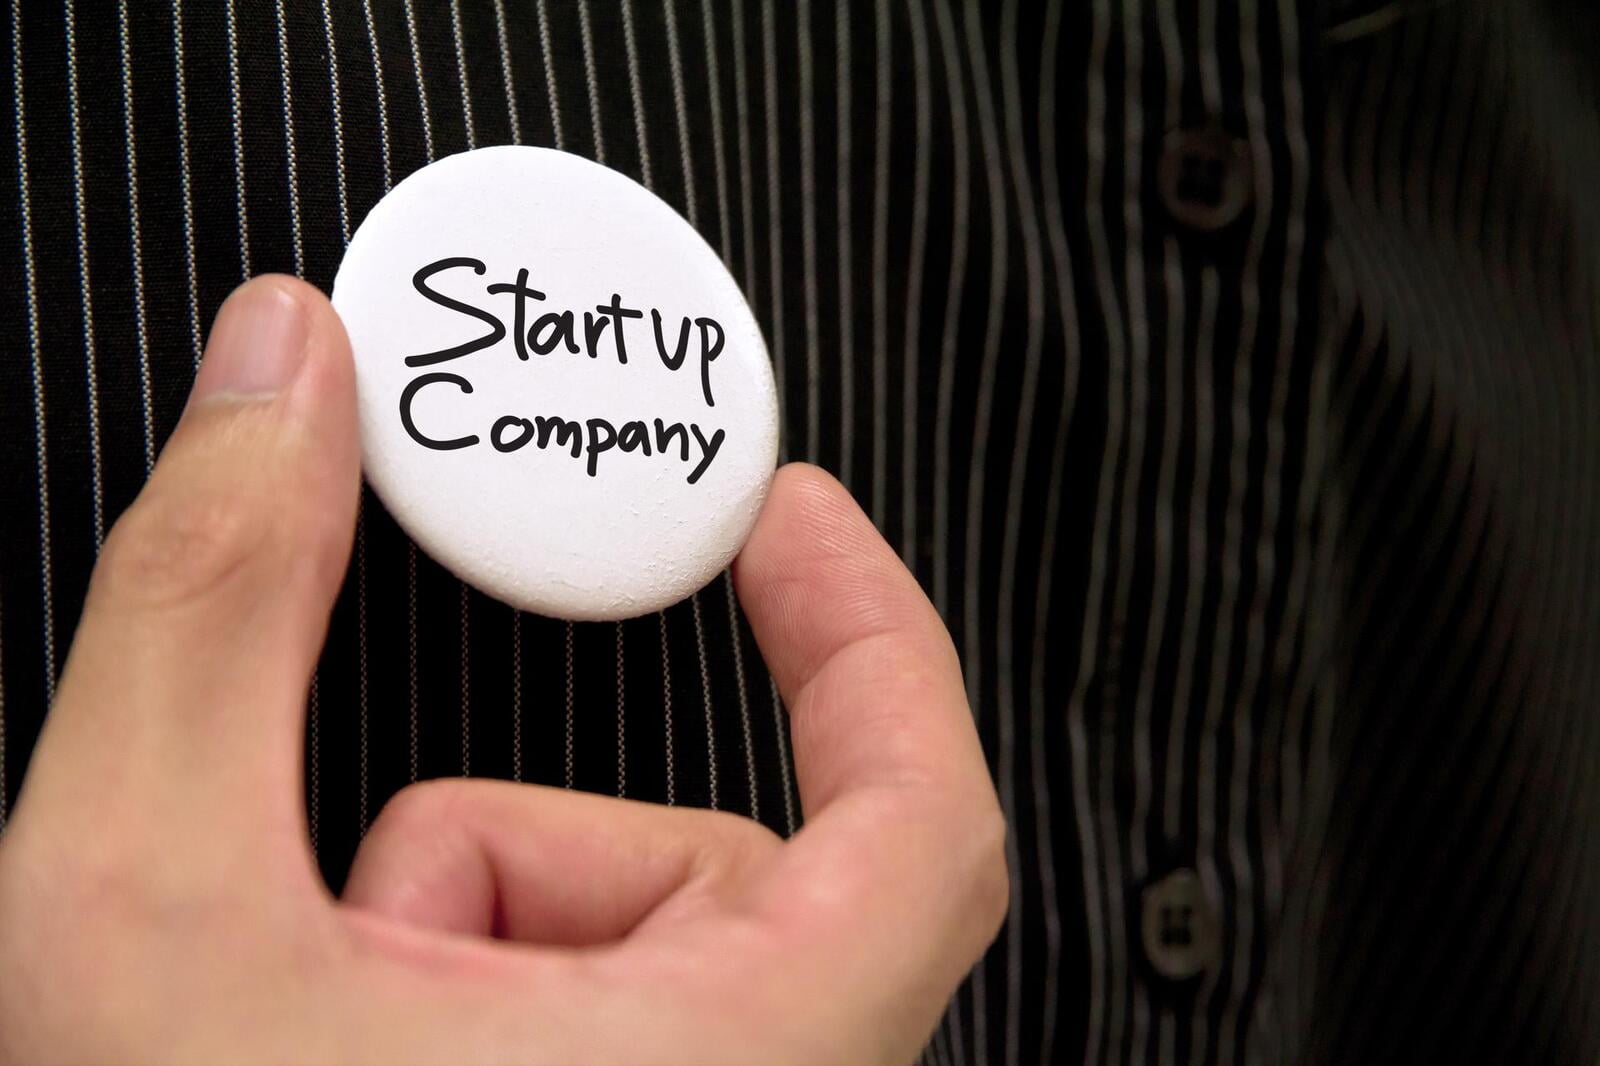 Lean Startup? Get yourself sorted with enterprise grade systems for a lean startup budget